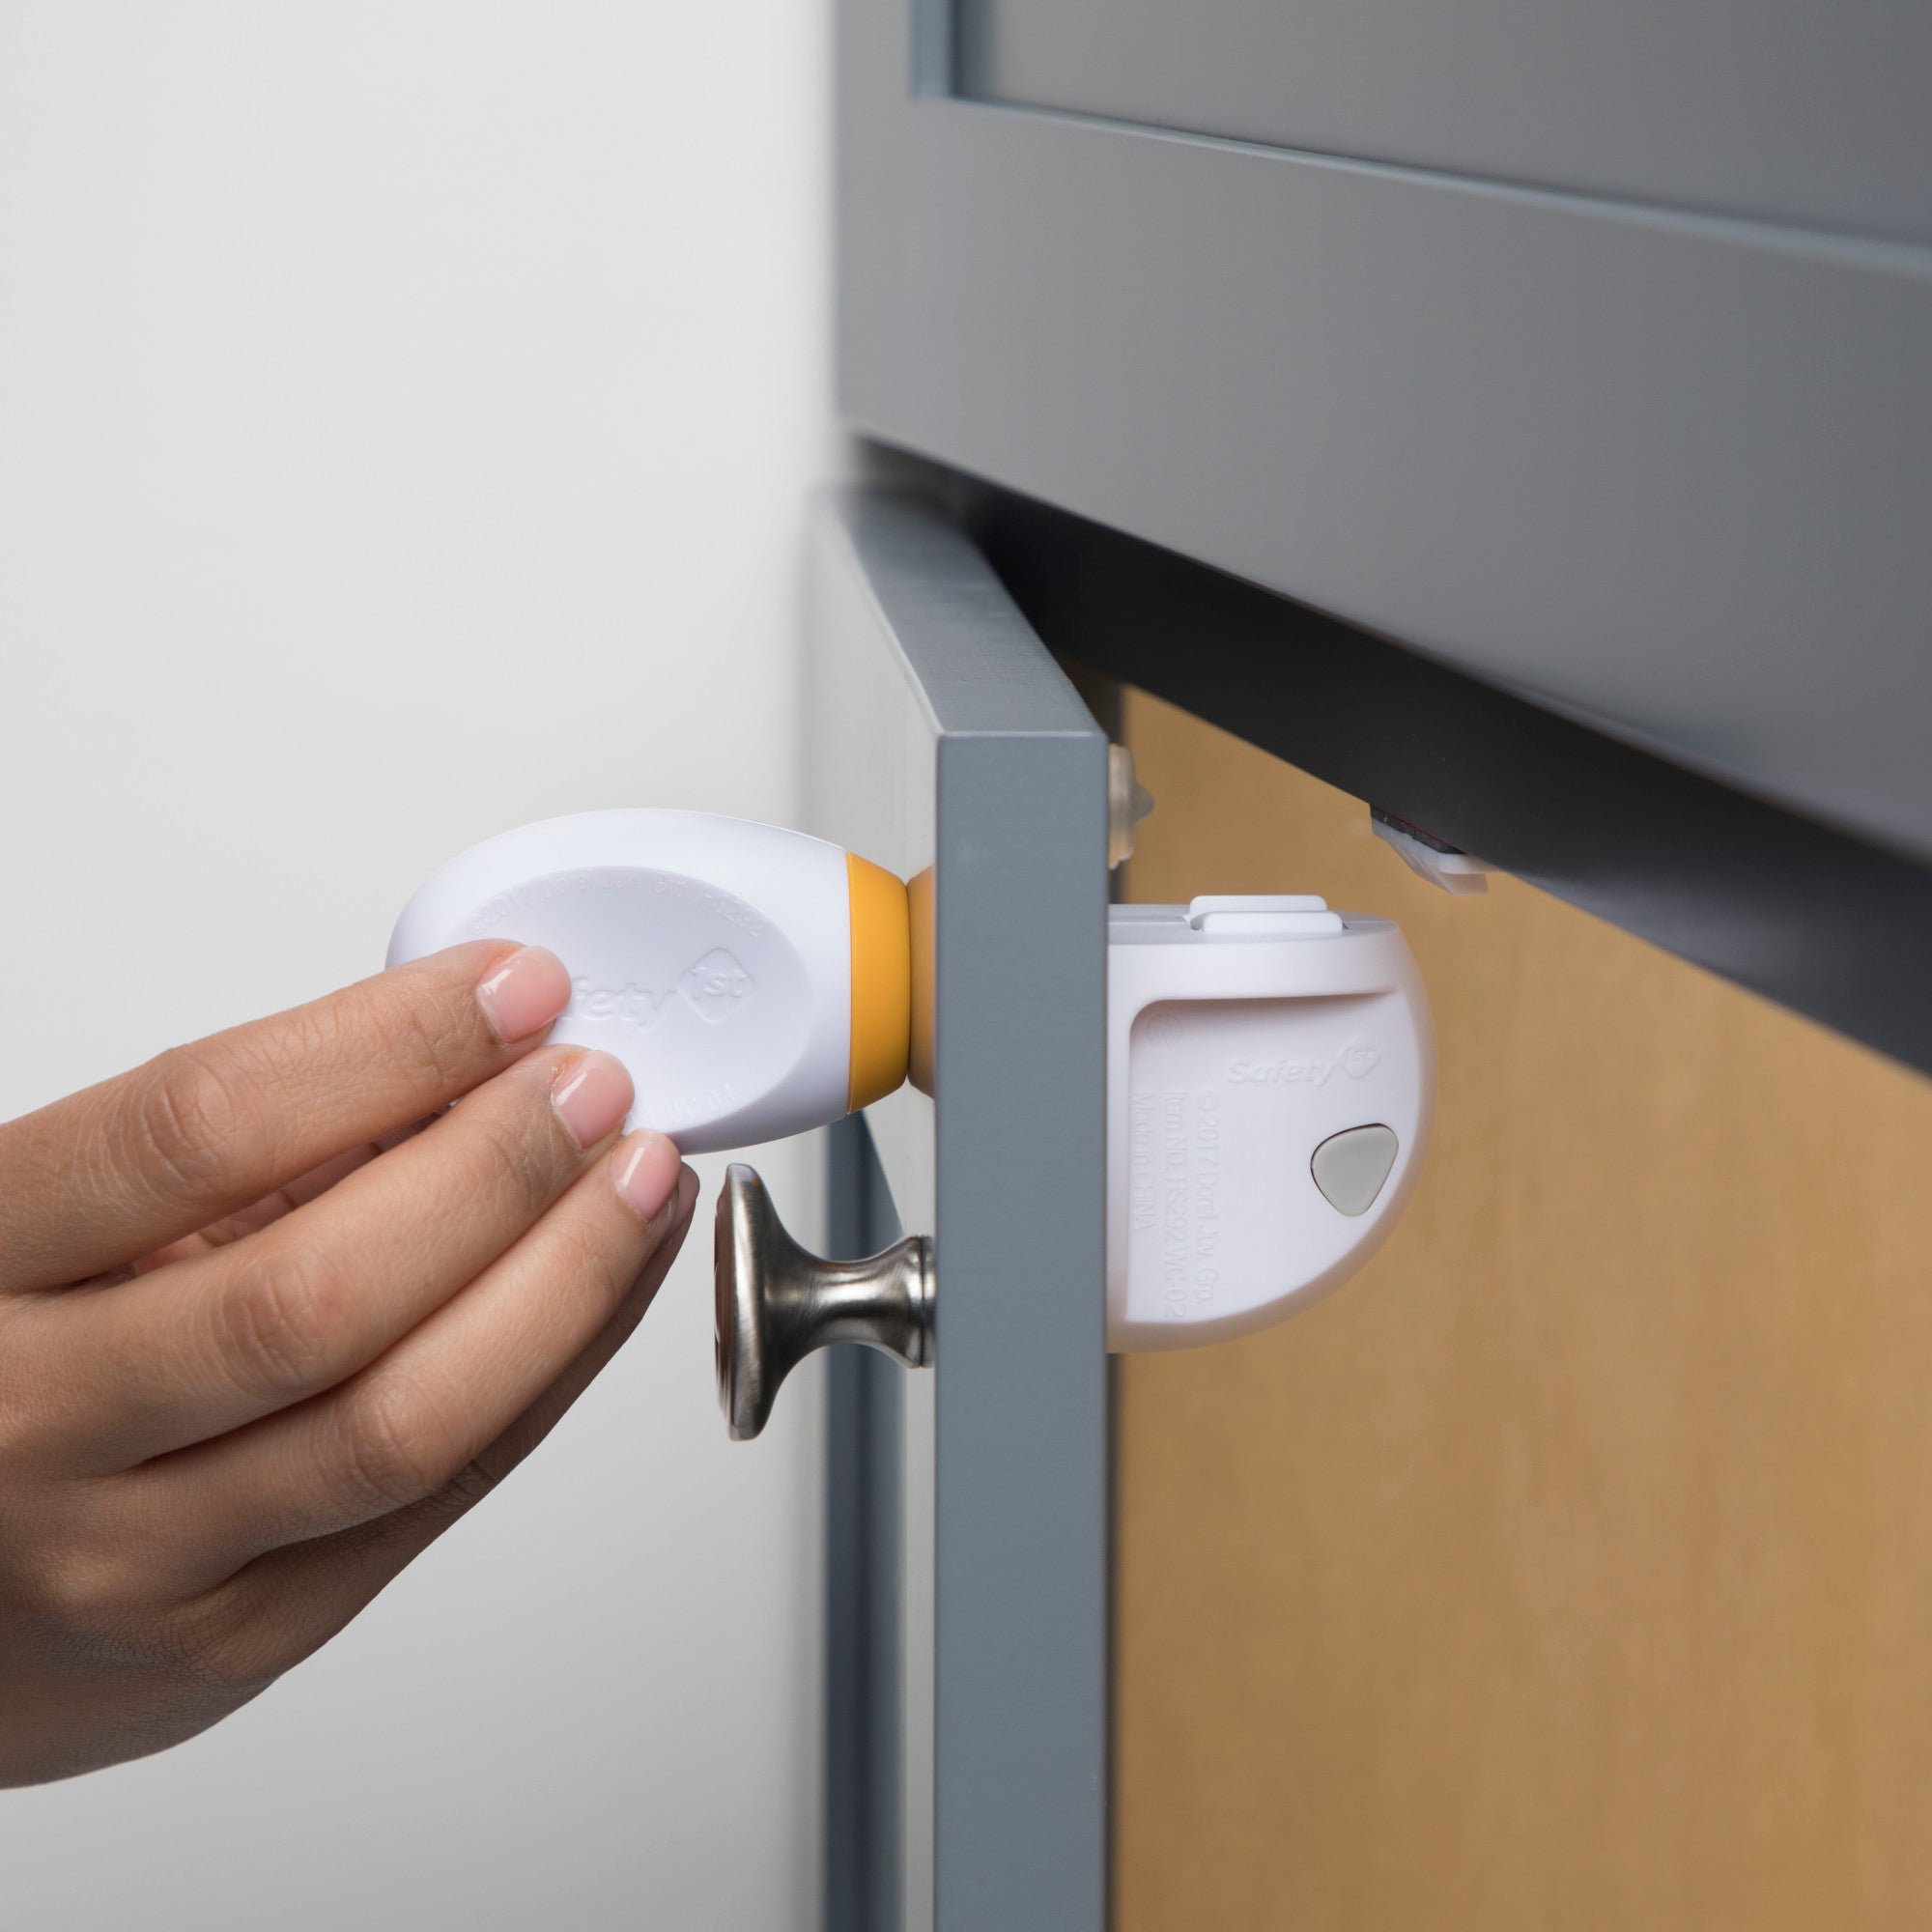 Magnetic cabinet lock being demonstrated on a cabinet